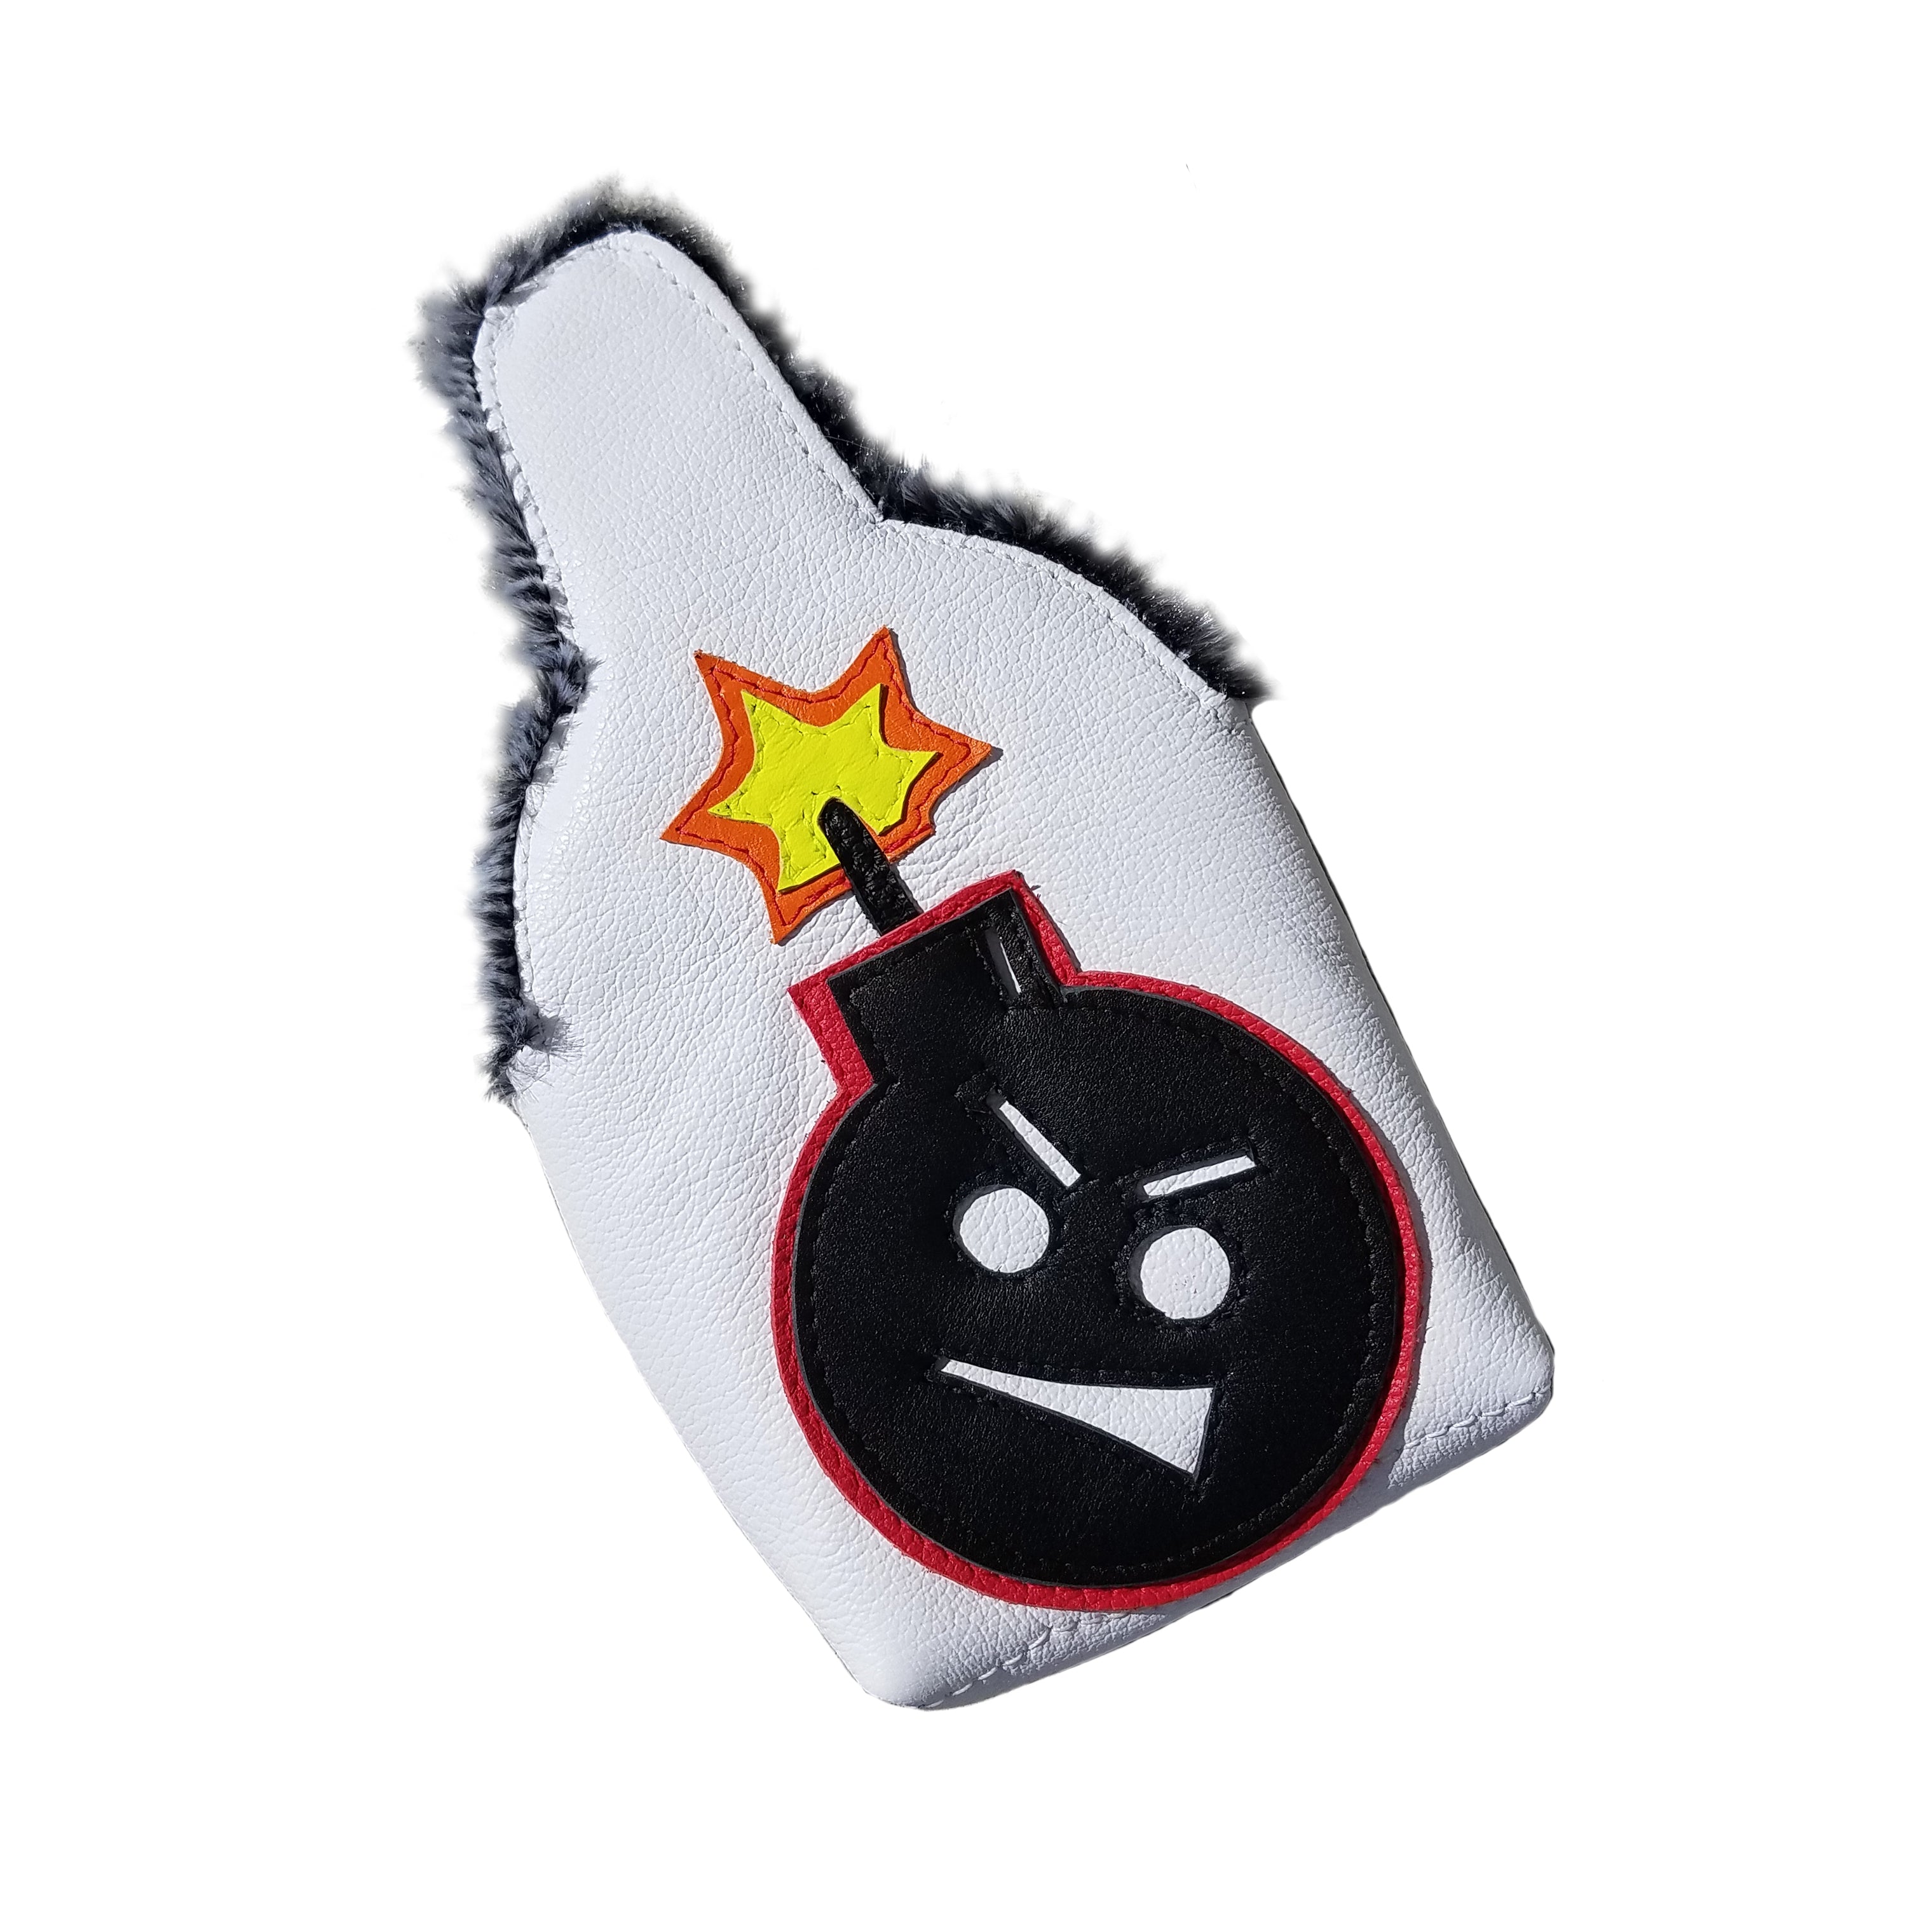 Tour Model "Angry Bomb" Mallet Putter Cover - Robert Mark Golf